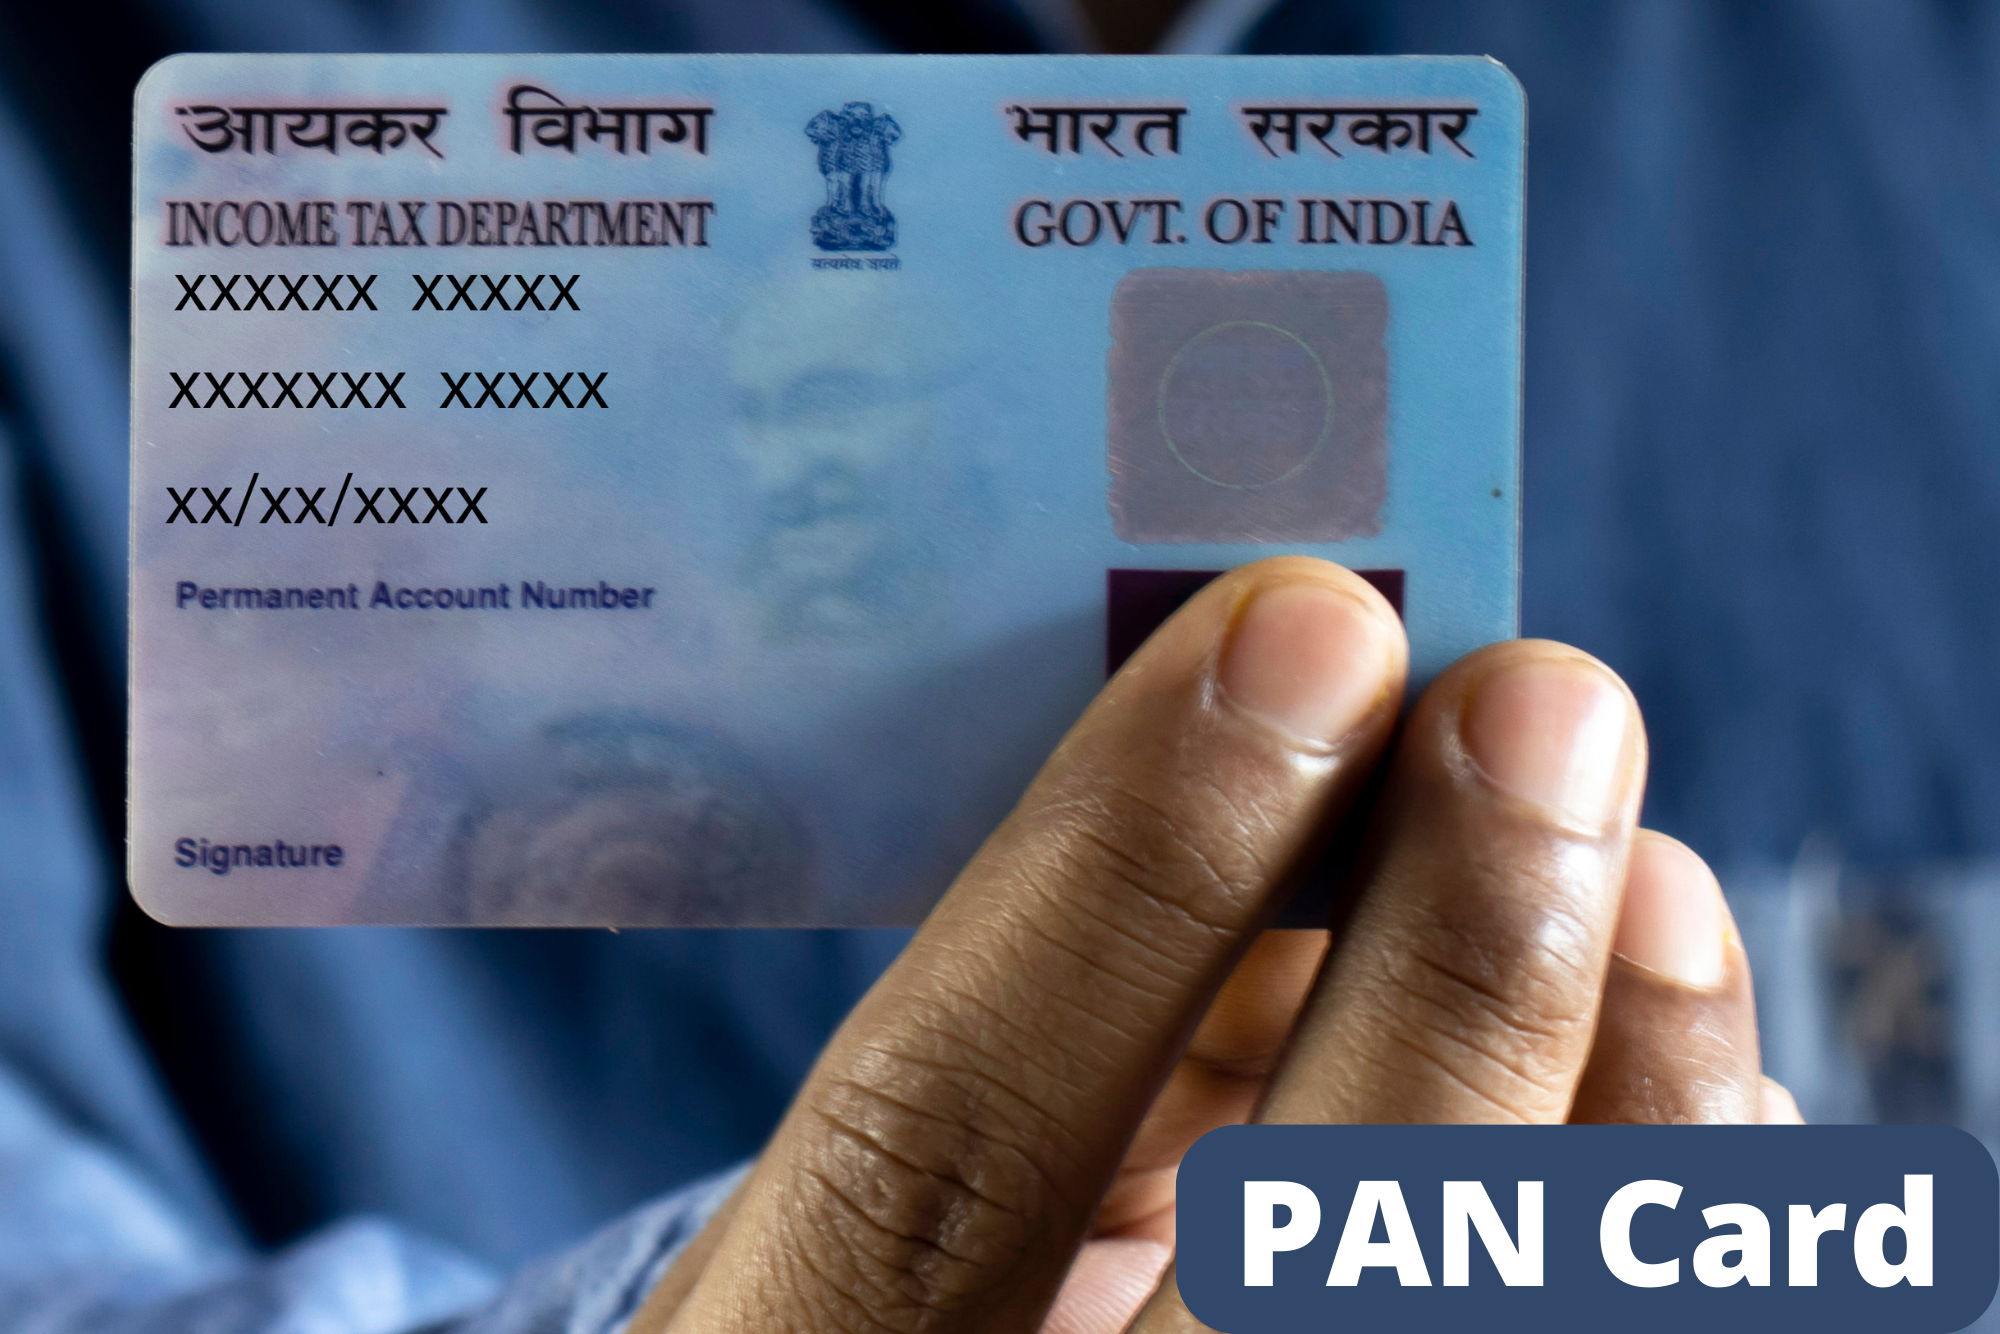 How to Apply for a PAN Card Online?